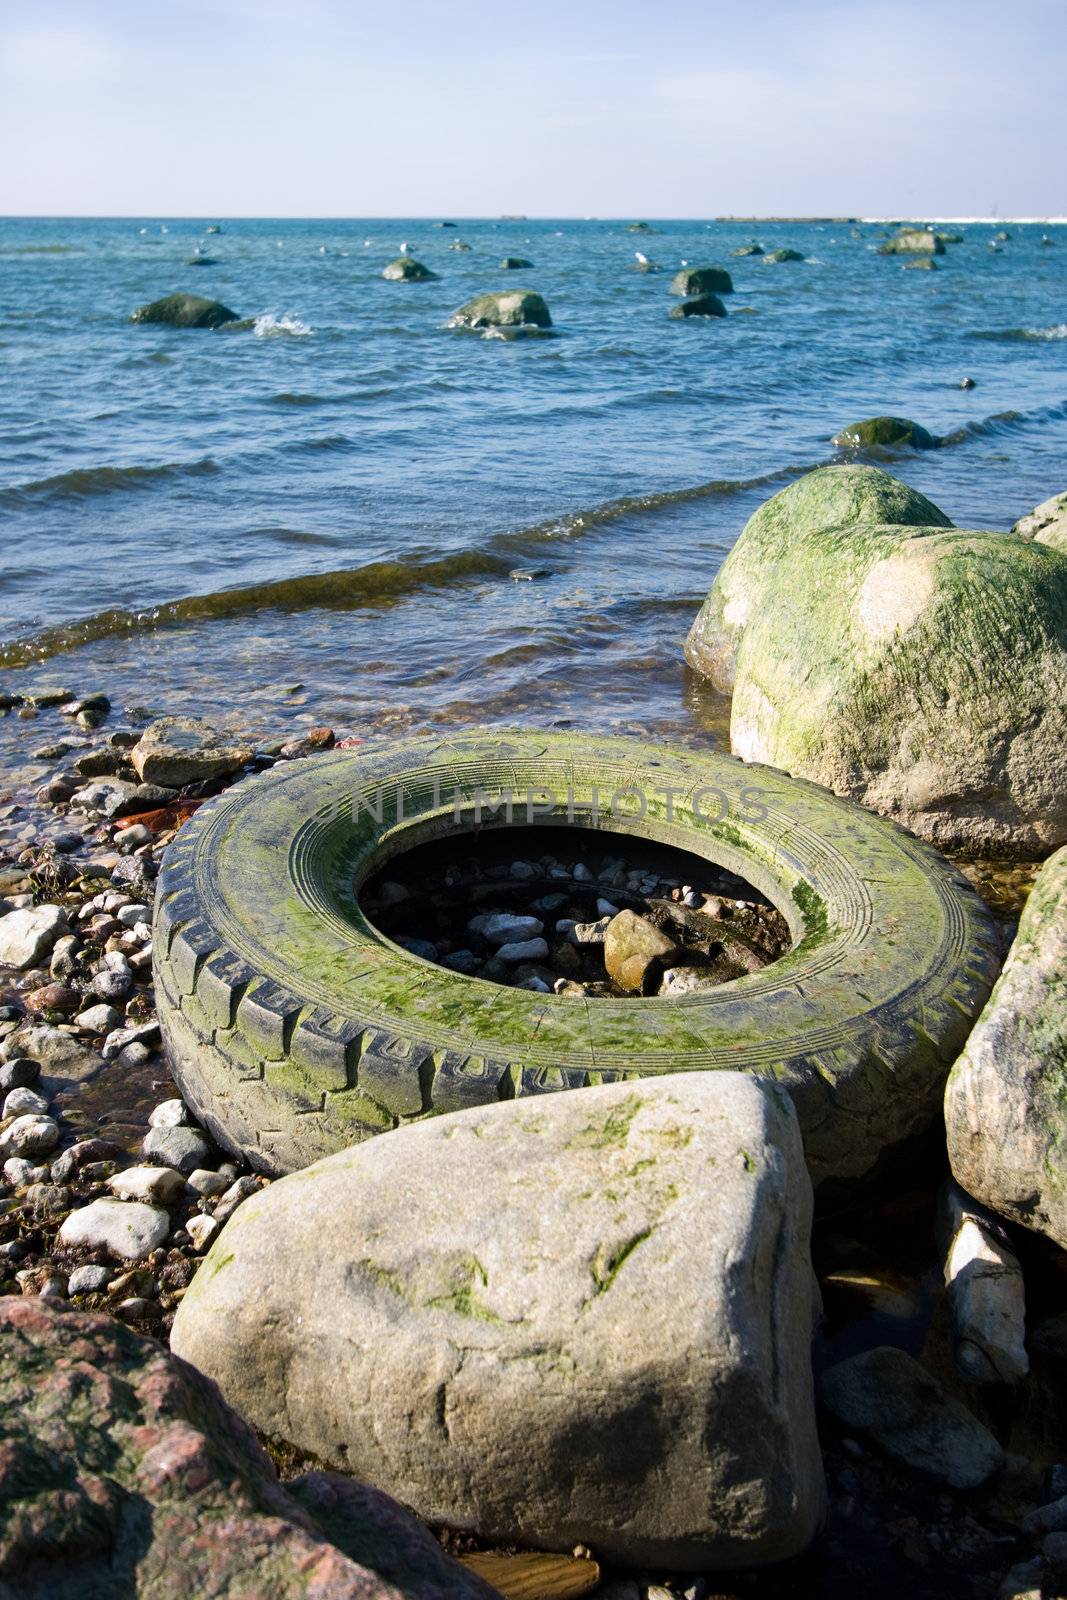 Old tyre polluting a seashore due to insufficient recycling